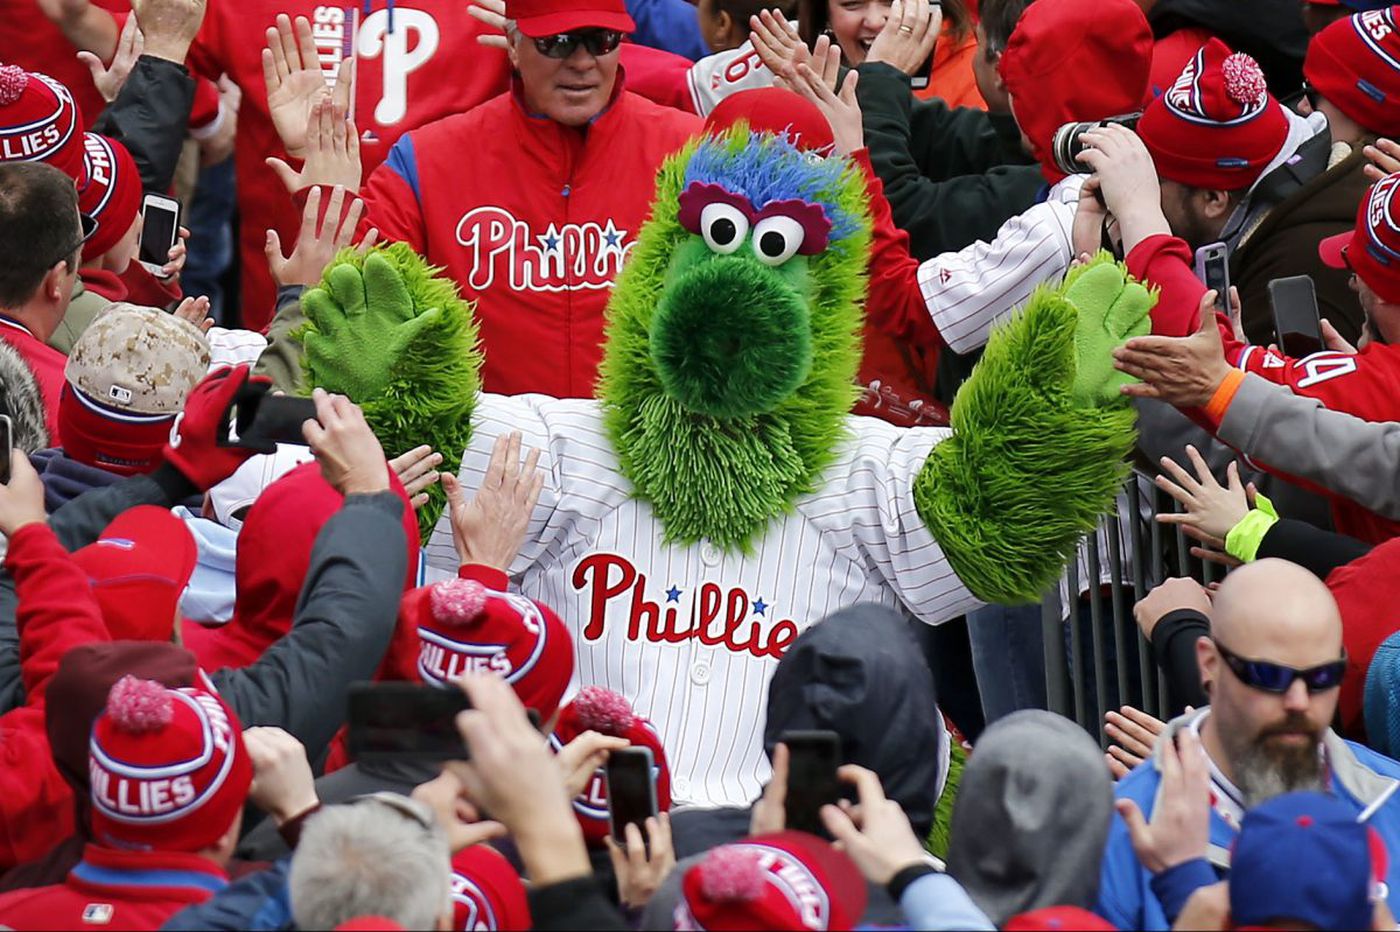 ‘It was one heck of a day’ Phillies fans reflect on opening days past